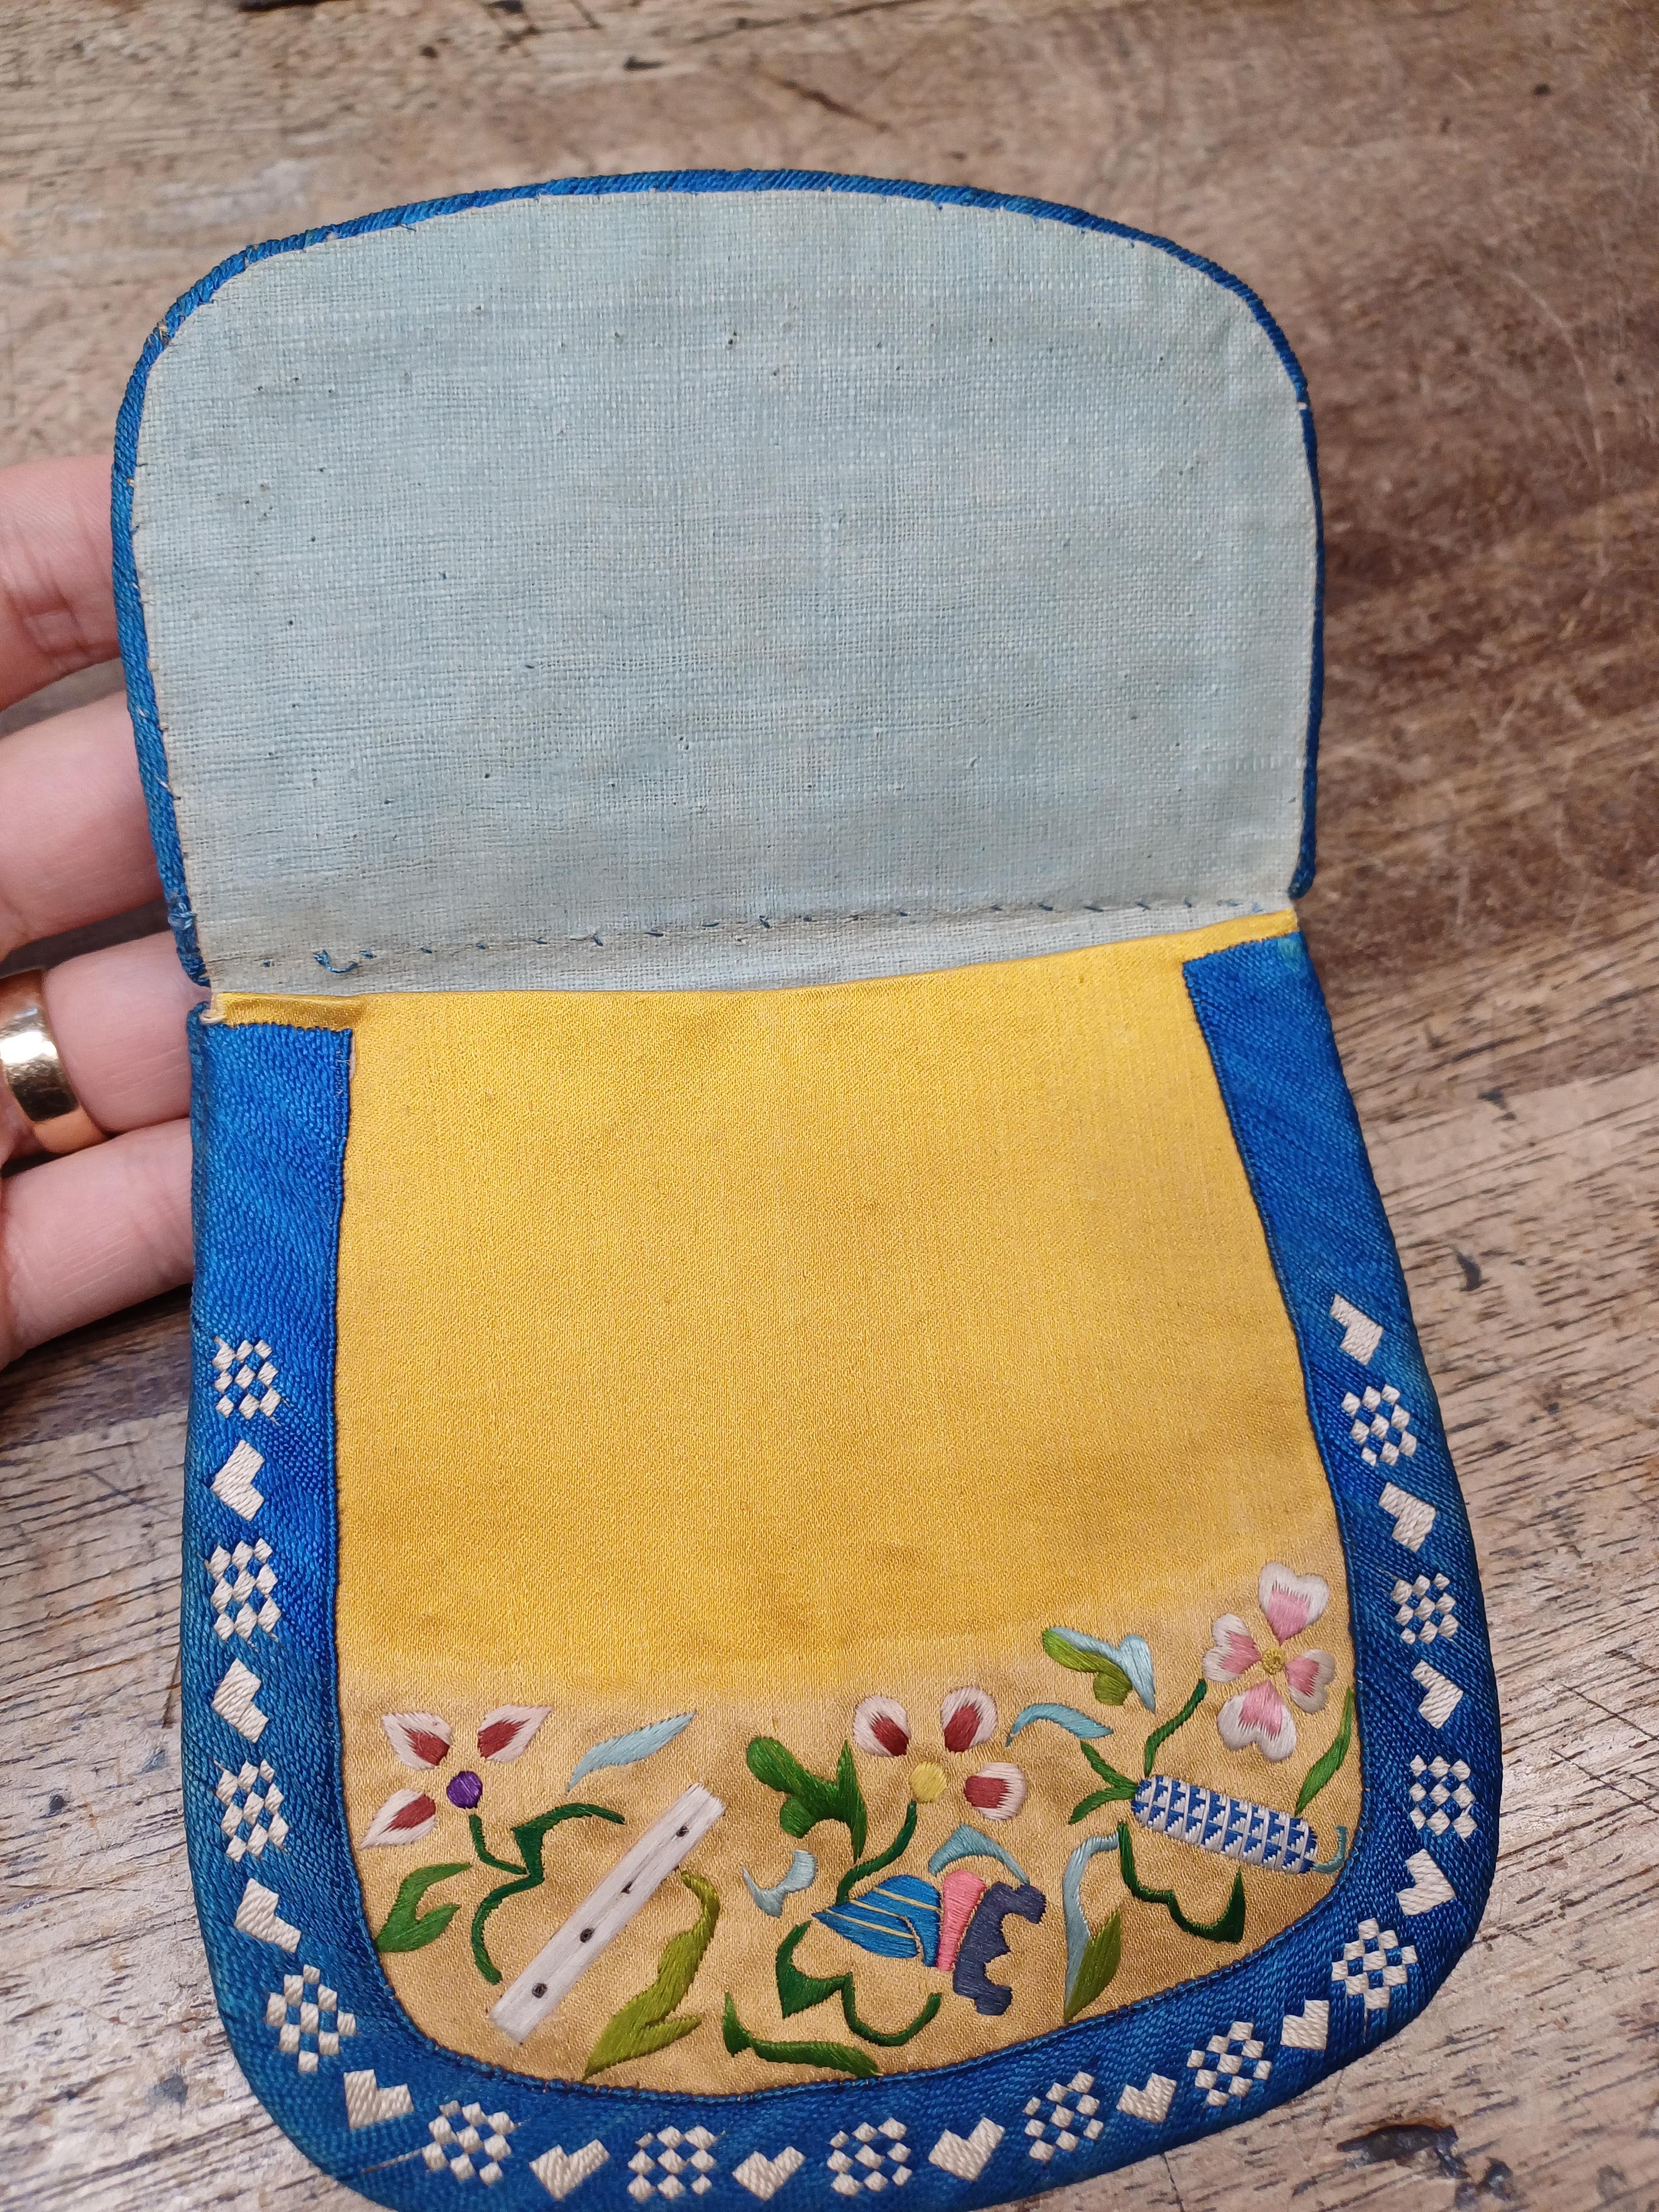 A CHINESE SILK EMBROIDERED PURSE 清十九世紀 絲繡花卉圖紋包 - Image 10 of 10